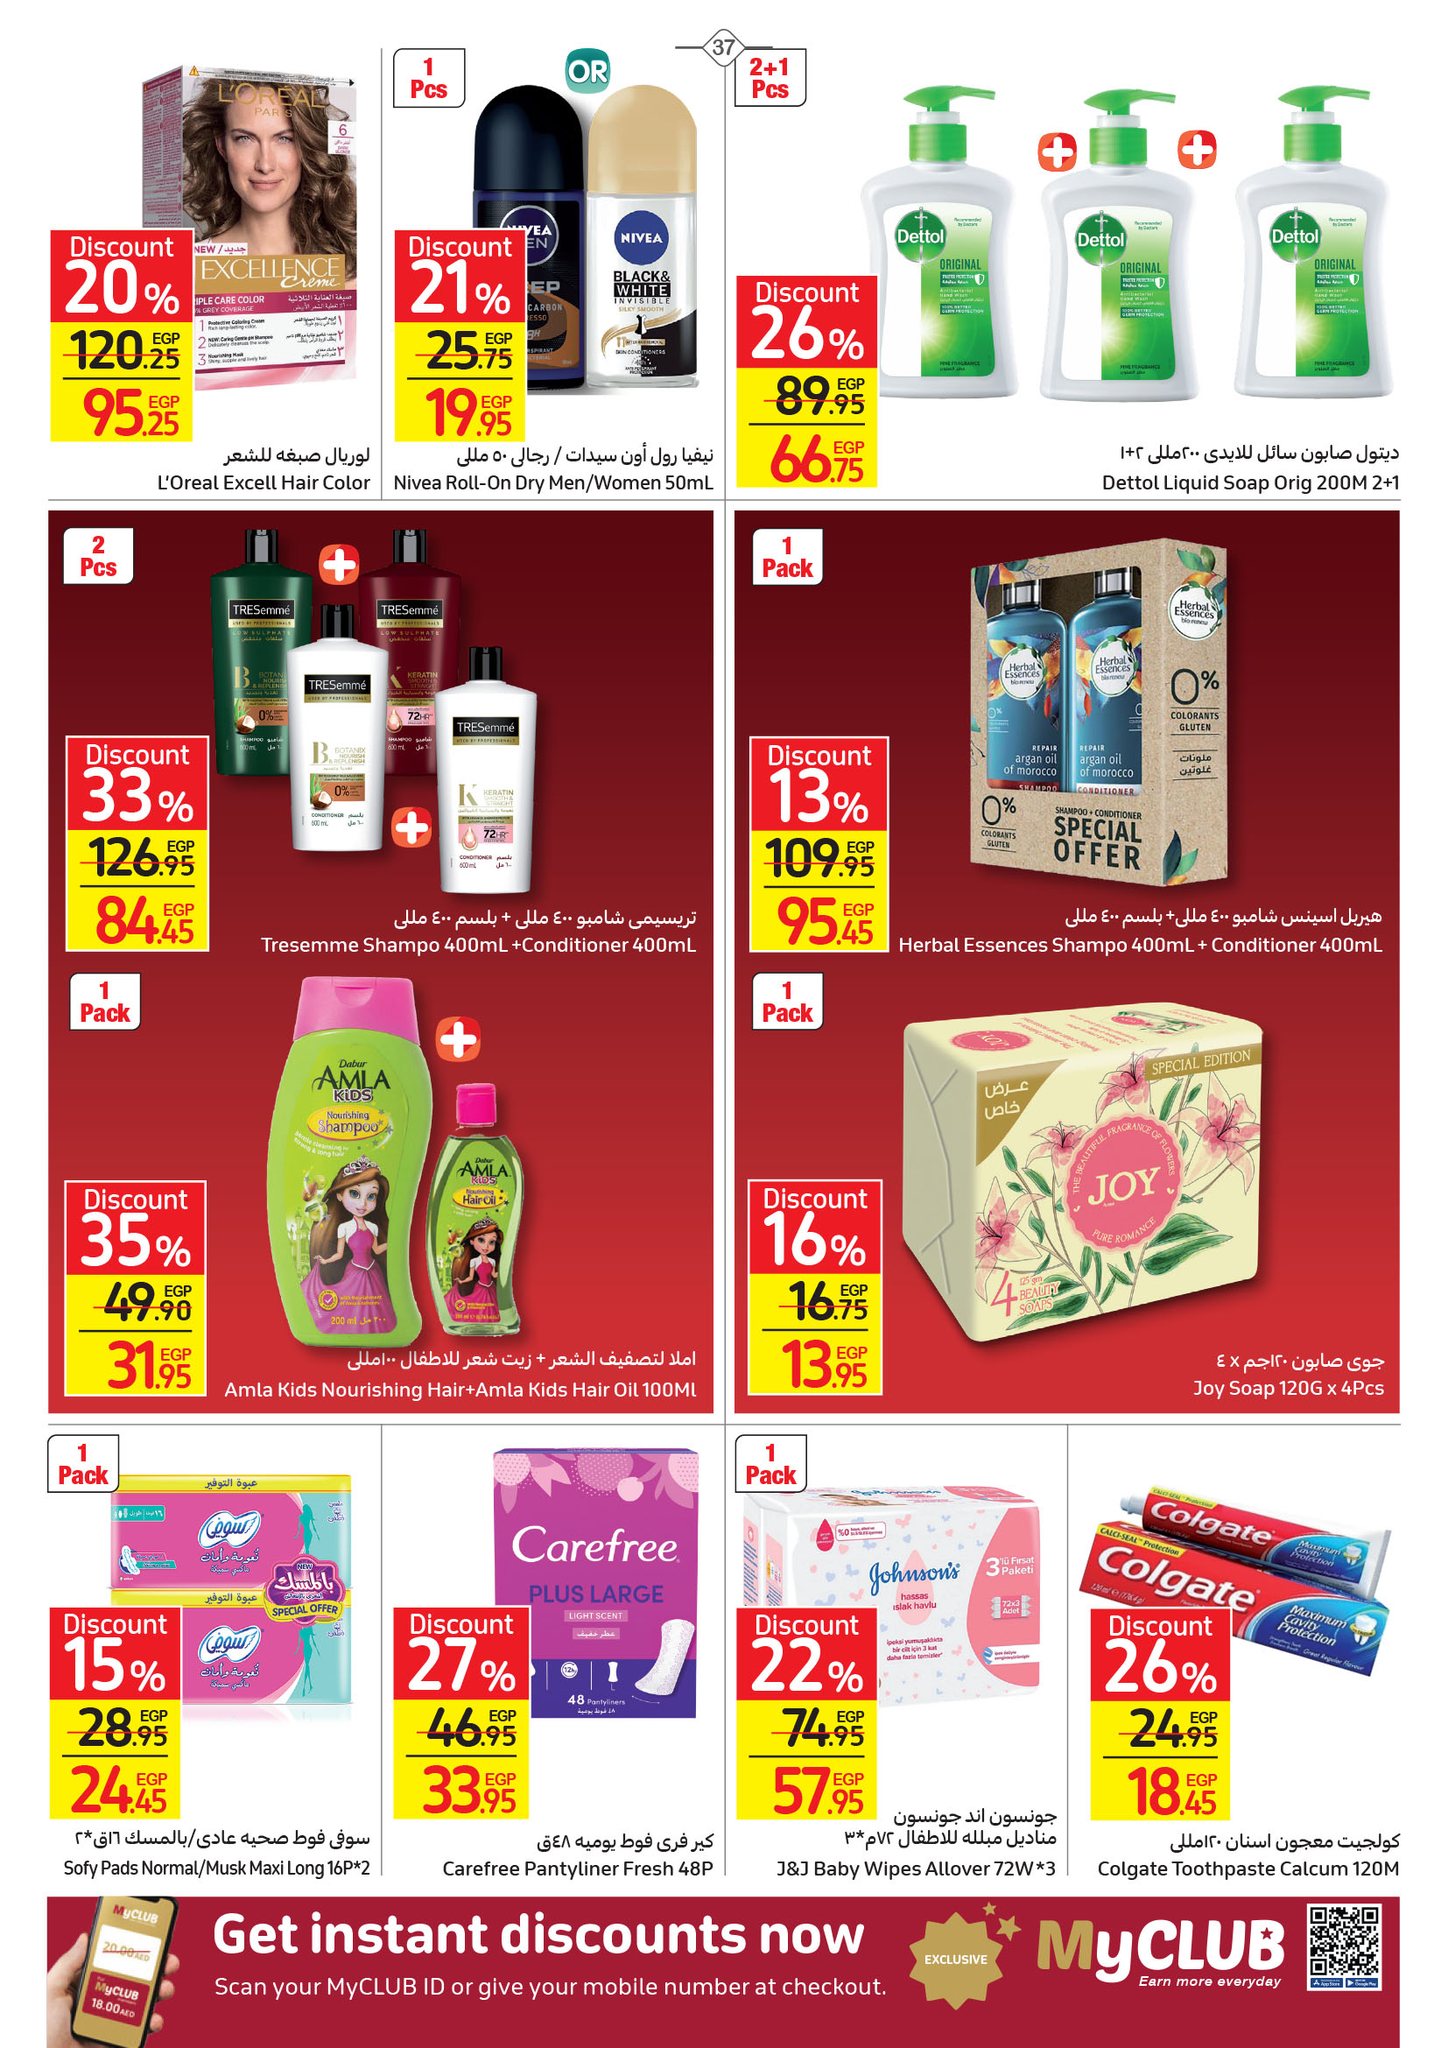 Watch the latest Carrefour half price offers "Last Chance Offer" until December 4th 37